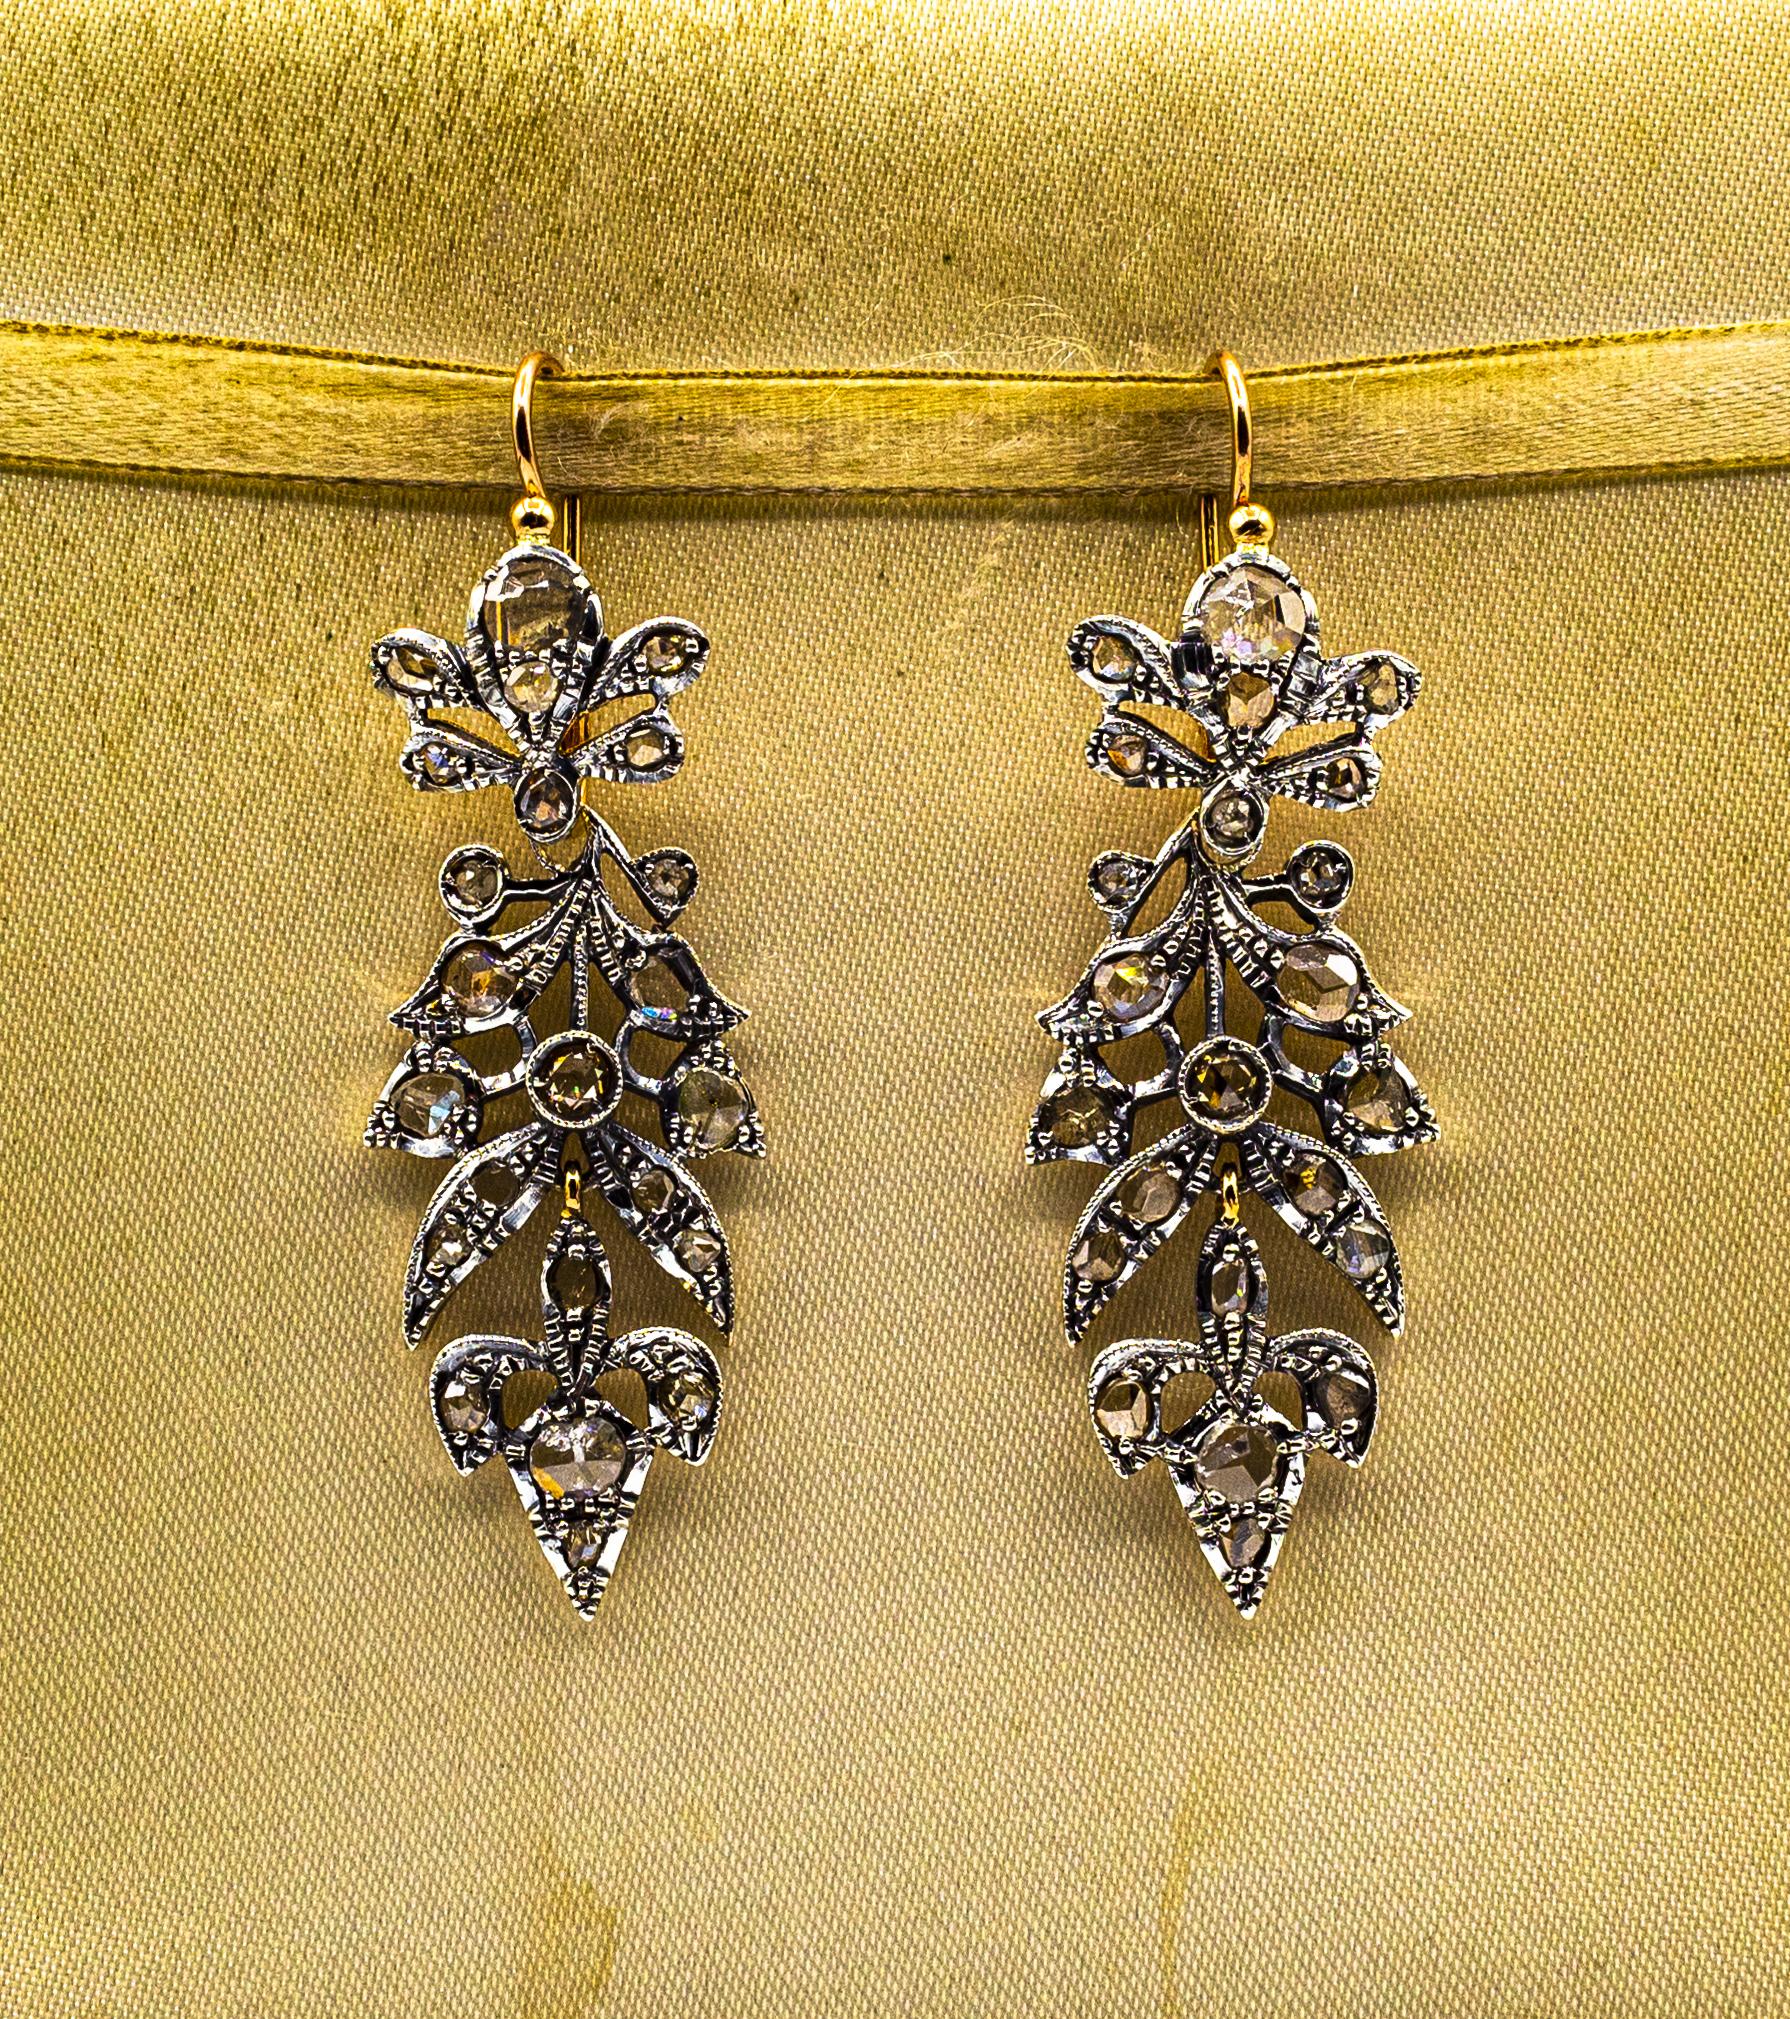 These Earrings are made of 9K Yellow Gold and Sterling Silver.
These Earrings have 3.70 Carats of White Rose Cut Diamonds.

All our Earrings have pins for pierced ears but we can change the closure and make any of our Earrings suitable even for